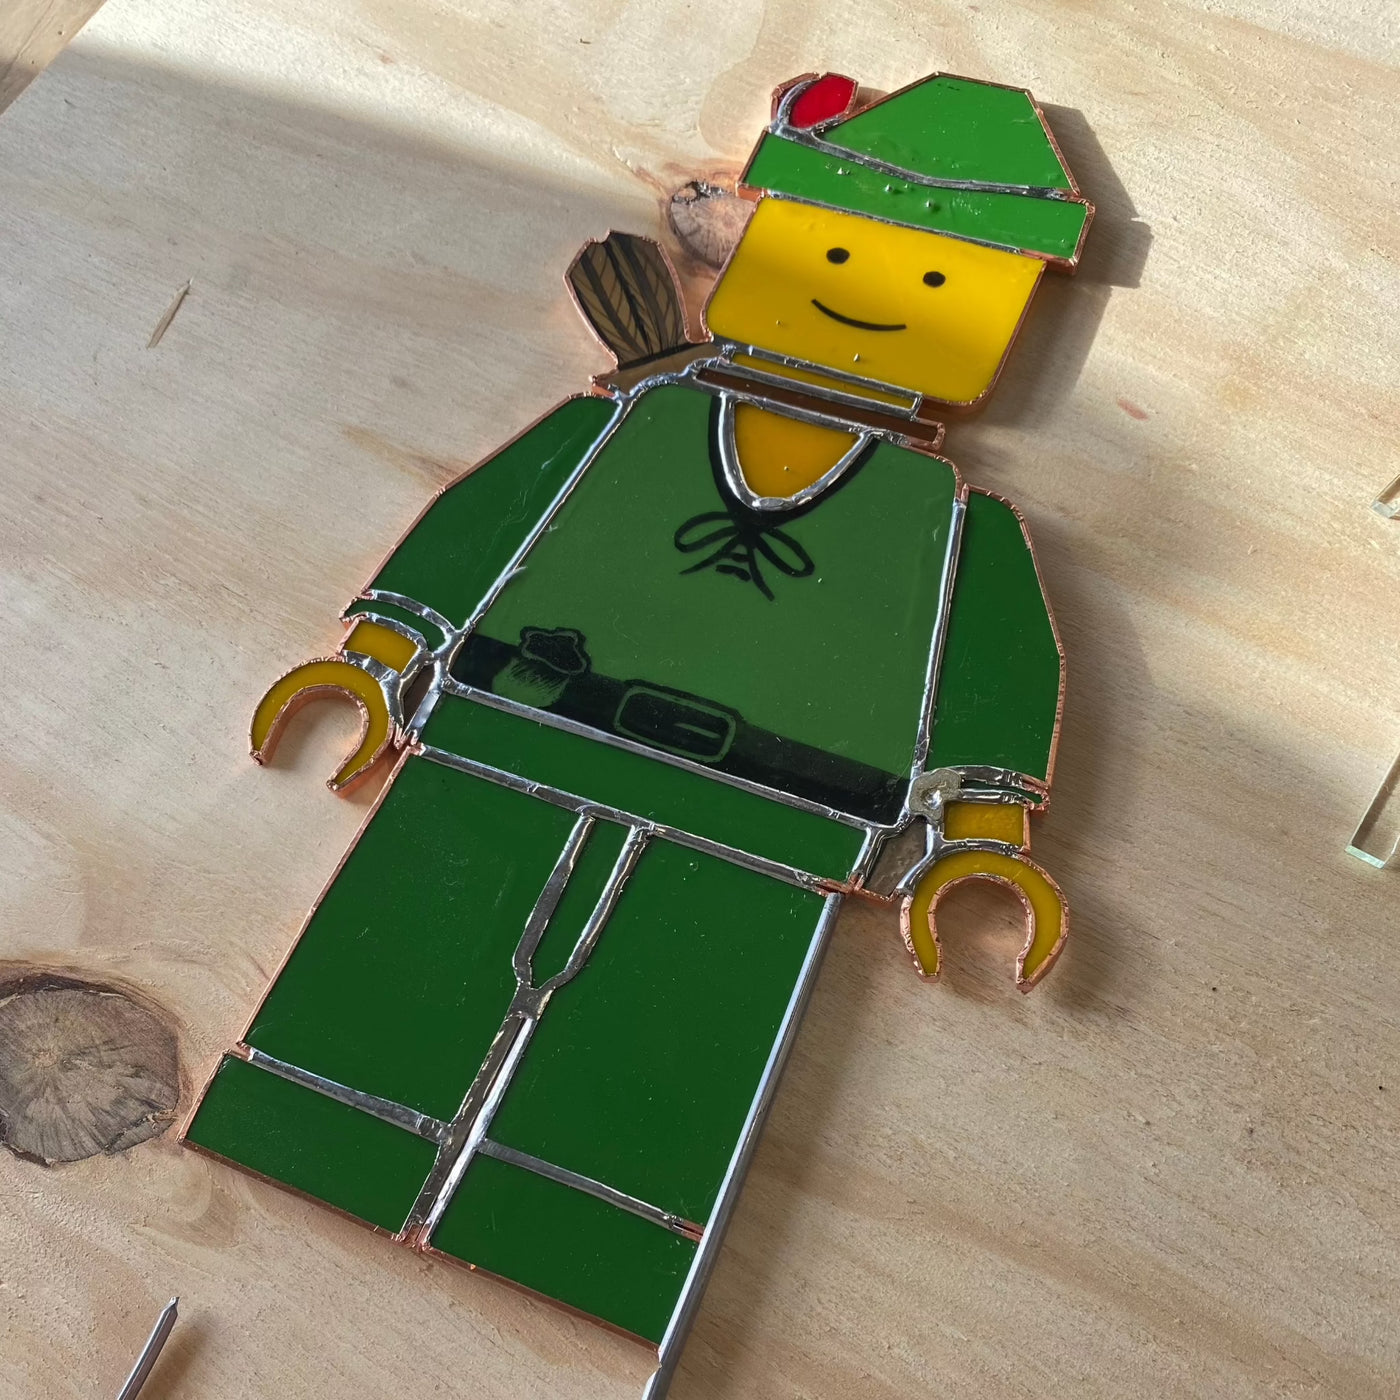 lego forestman minifigure stained glass art_2